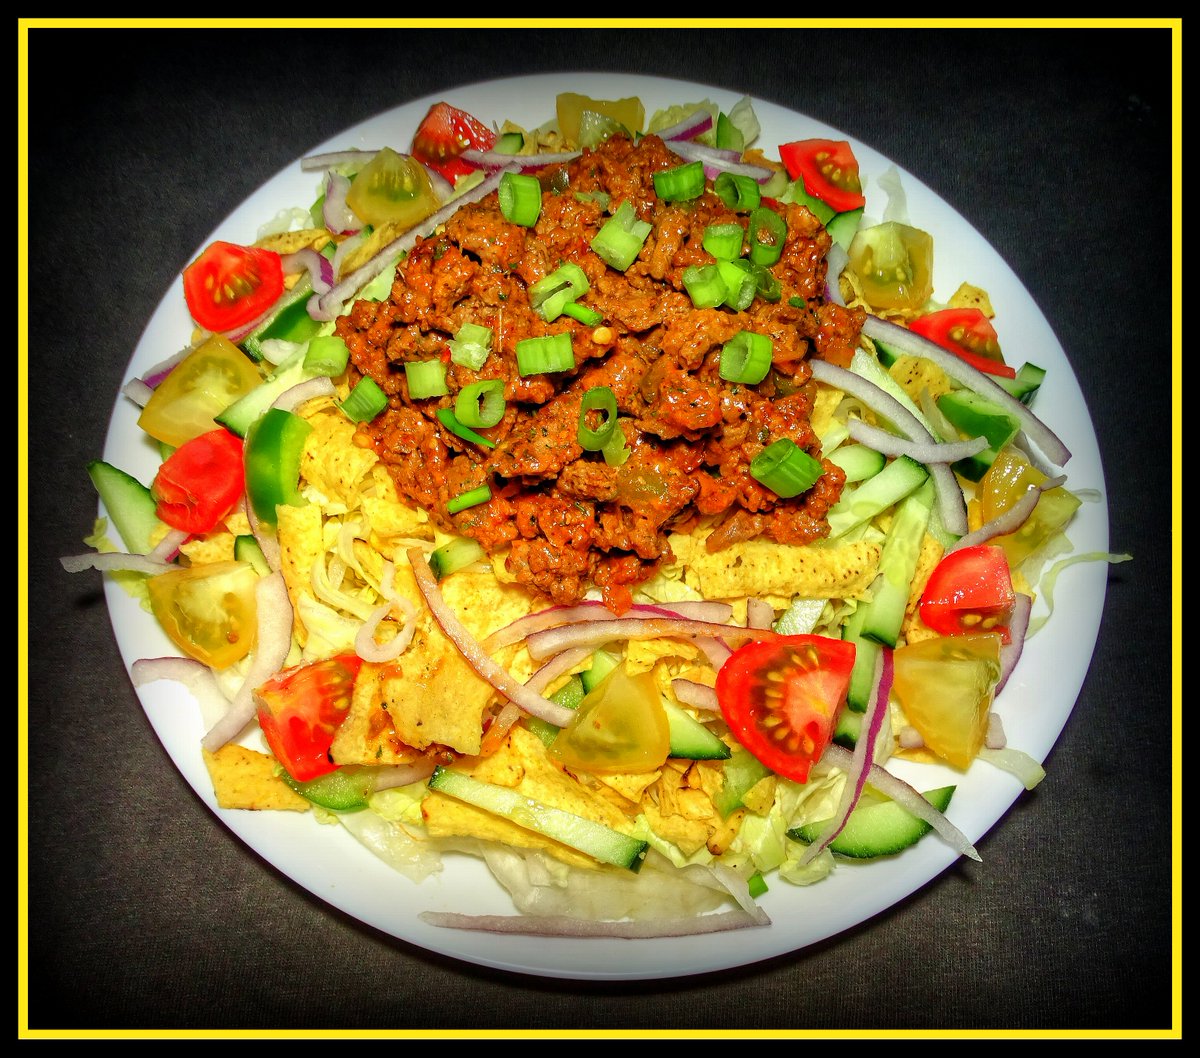 Ground Bison & Jalapeno Jack Cheese Taco Salad #groundbison #bison #jalapenojackcheese #jackcheese #tacosalad #salad #lettuce #tortillachips #redonion #greenpeppers #tomatoes #tomatillosauce #jalapenopeppers #cucumber #greenonions #BothwellCheese #pandemiclife #Manitoba